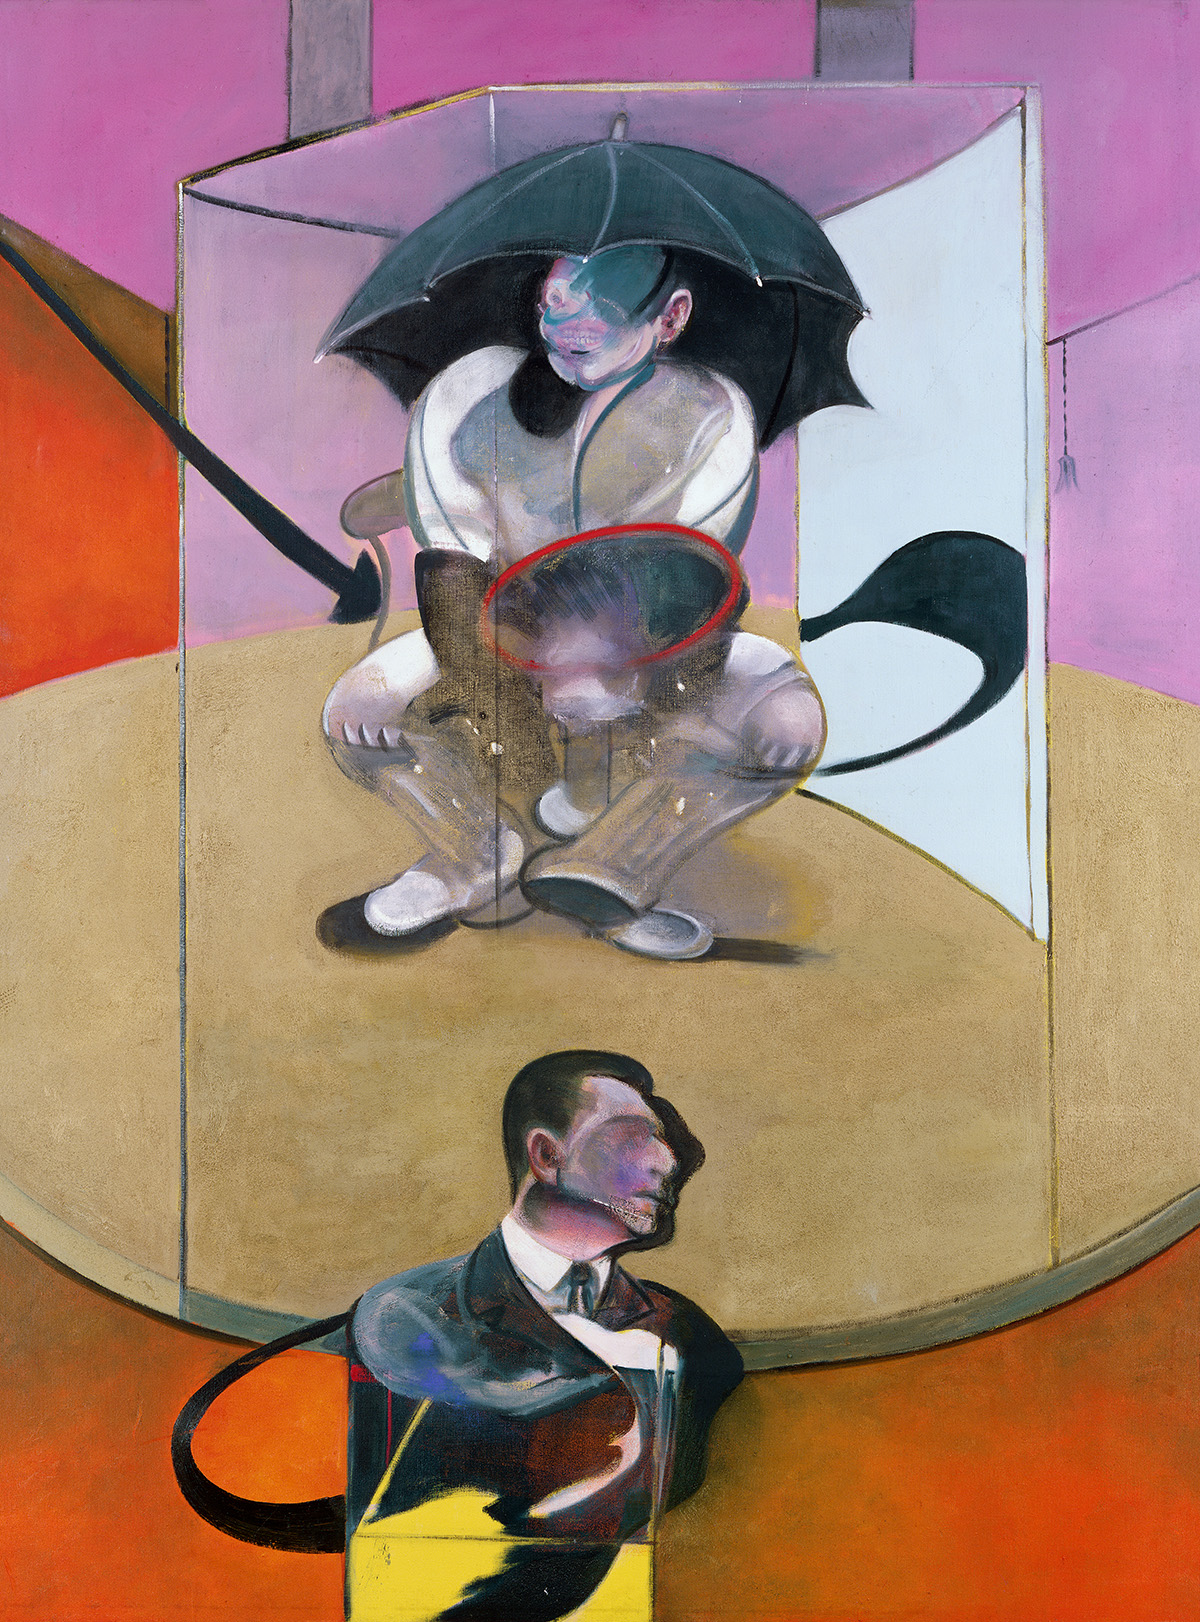 Francis Bacon, Seated Figure, 1978. Oil and sand on canvas. CR number 78-06. The estate of Francis Bacon / DACS London 2020. All rights reserved.